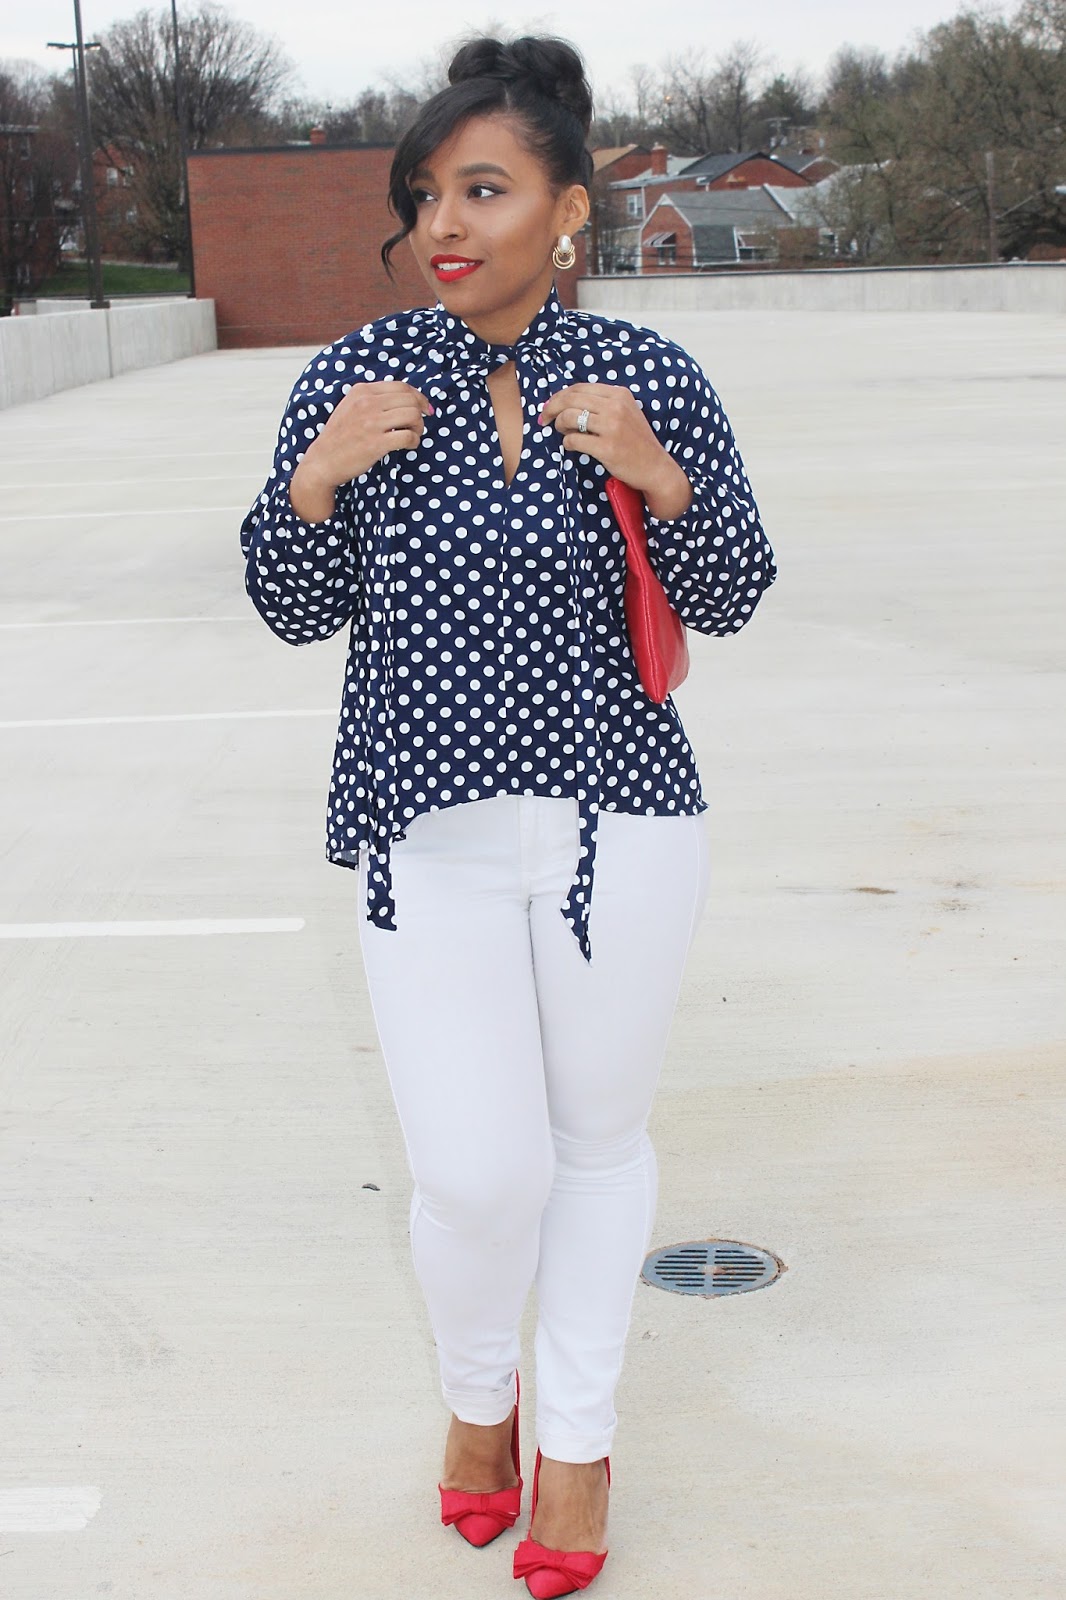 necktie blouse, polka dots, blue and red, spring looks, white denim